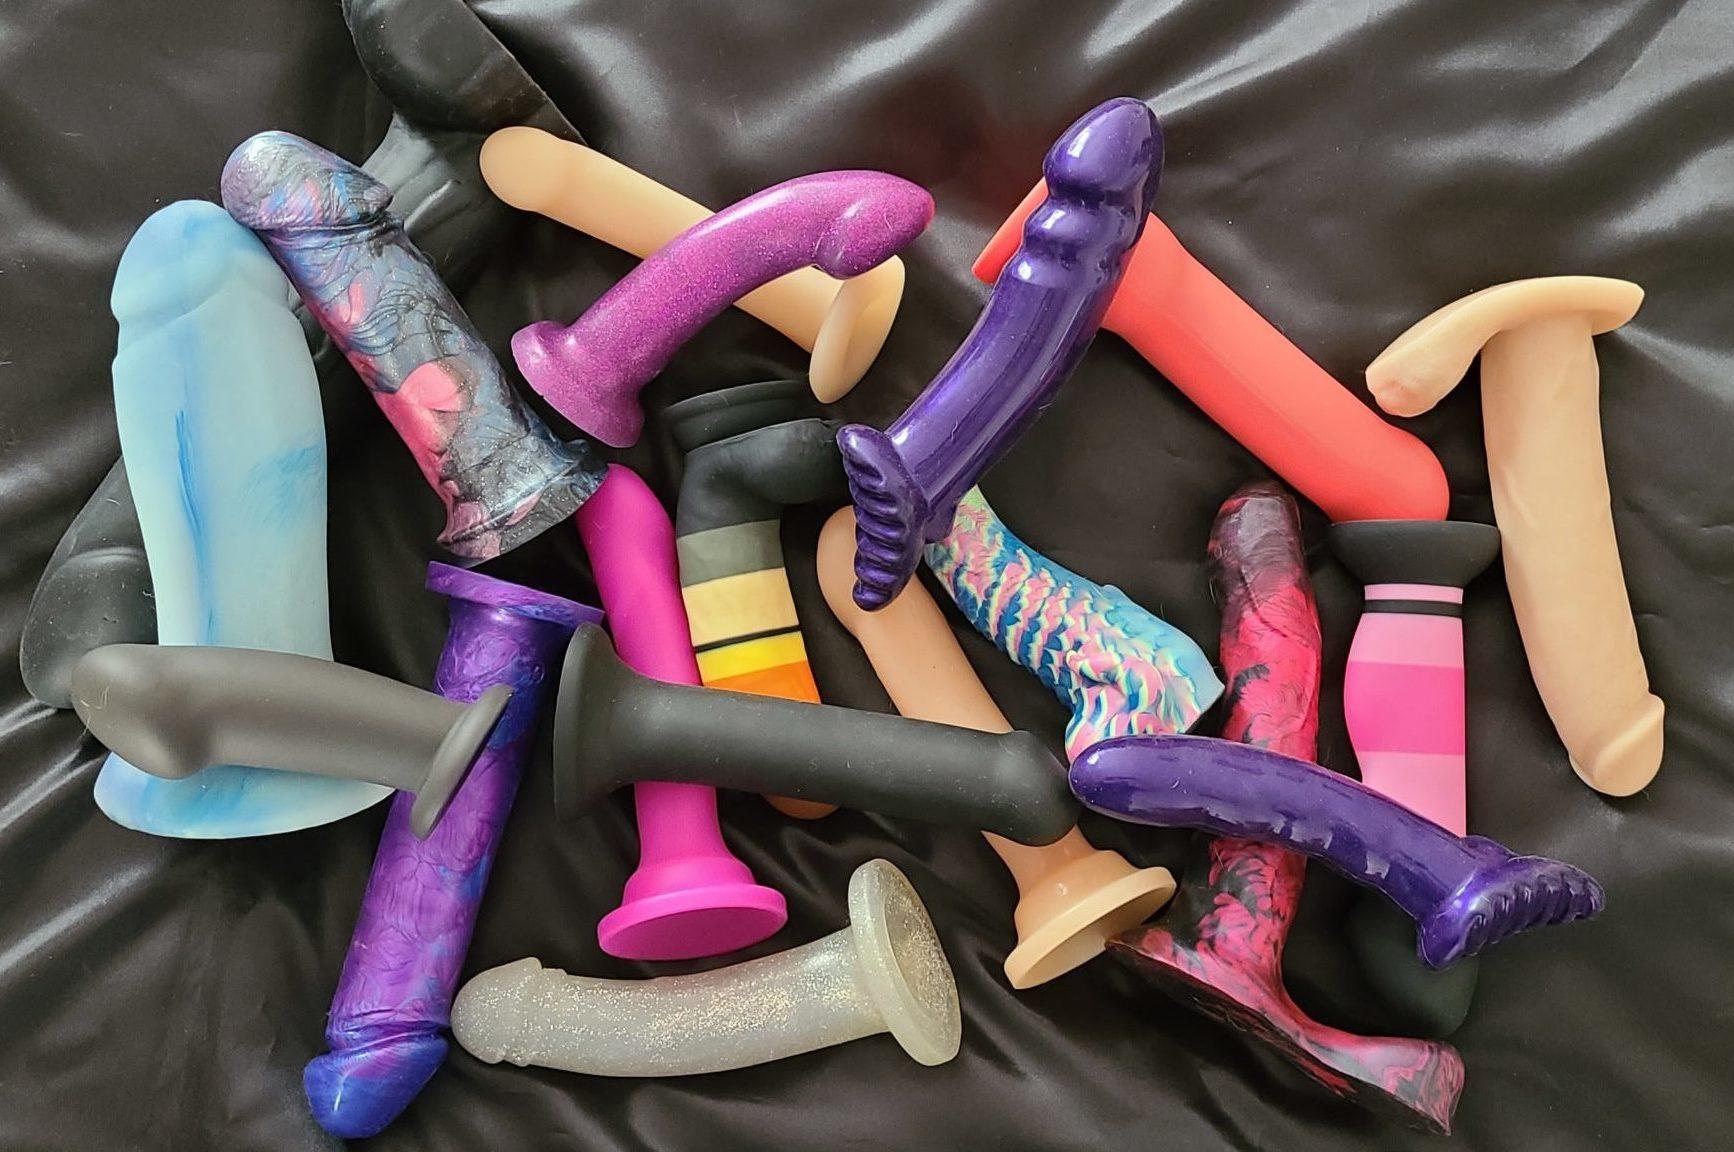 Sex Toys Making You Sick? • Ruby Ryder pic photo